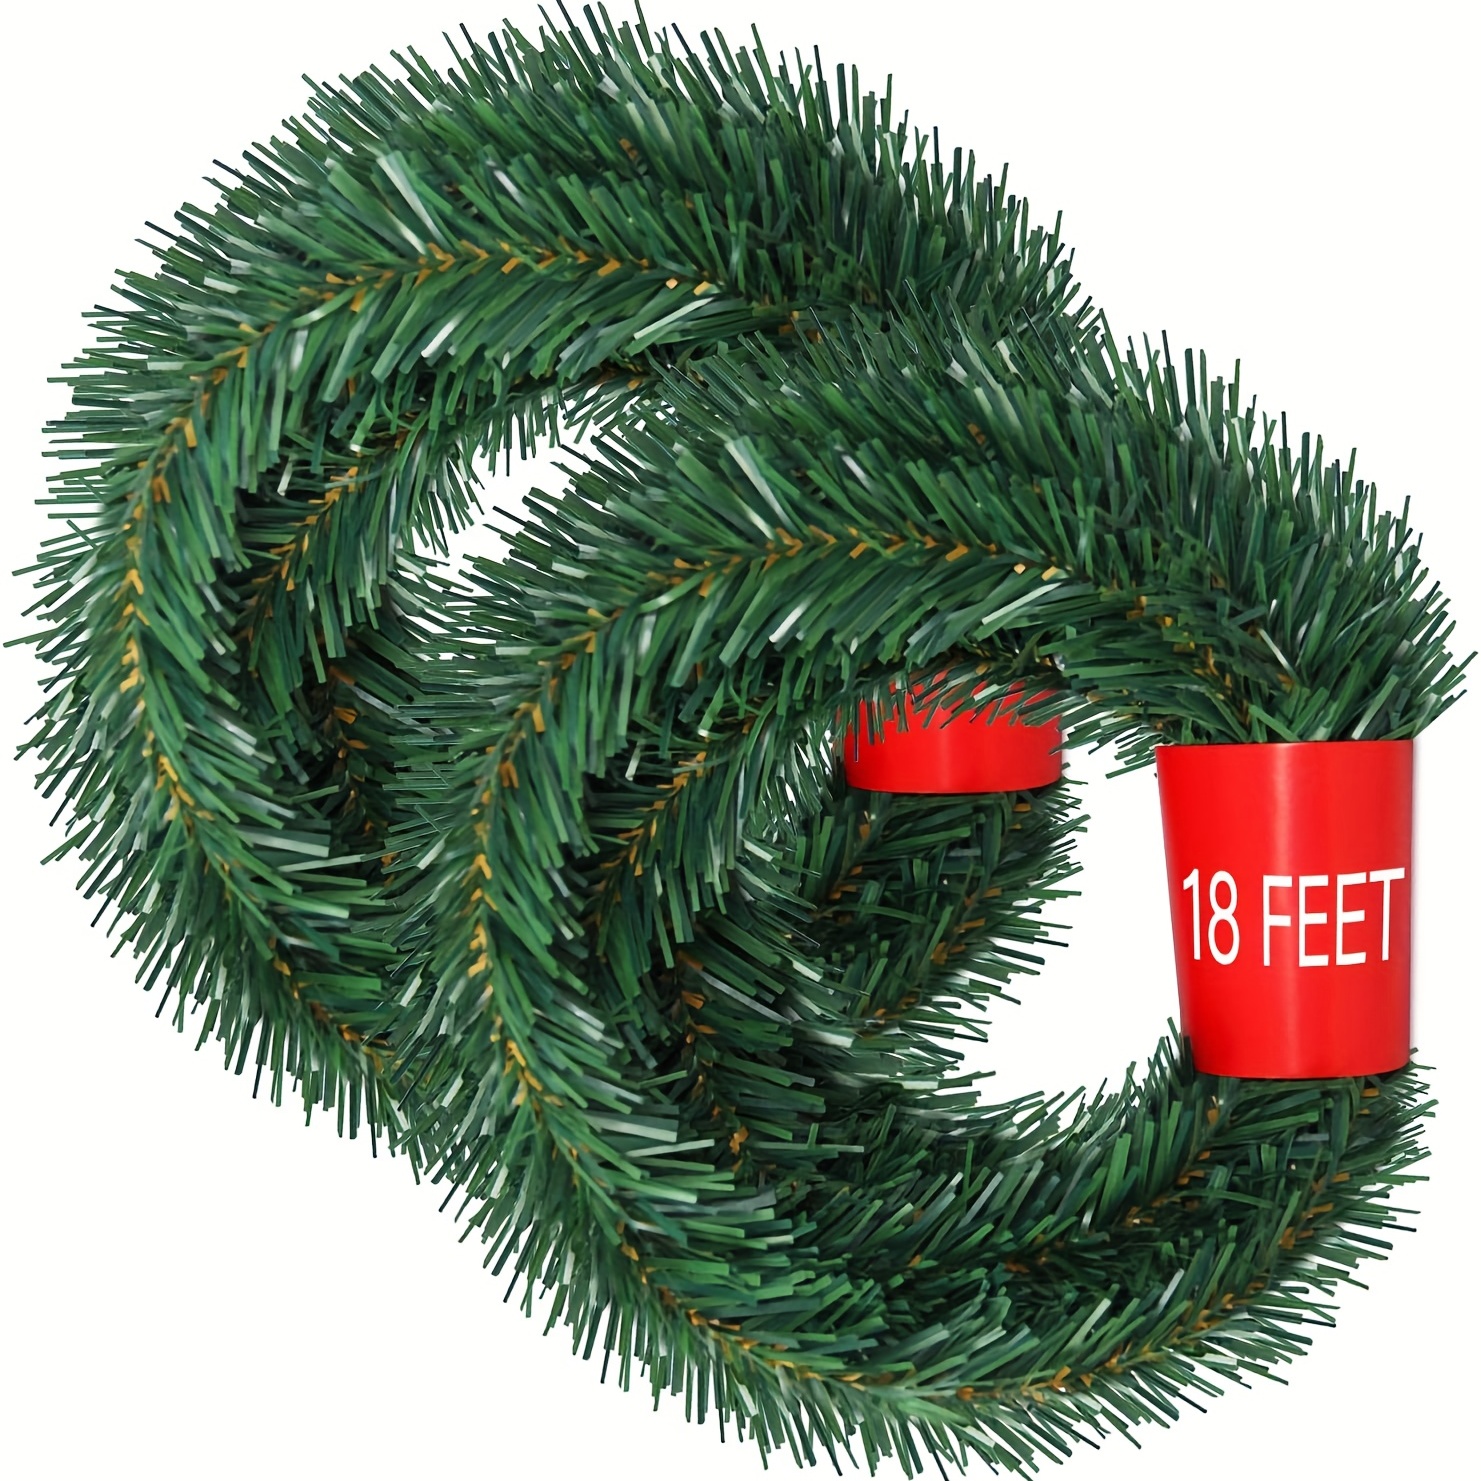 

1pc, 18 Feet Christmas Garland, Strands Artificial Pine Garland Soft Greenery Garland For Holiday Wedding Party Decoration, Outdoor Indoor Use, Christmas Decor Supplies